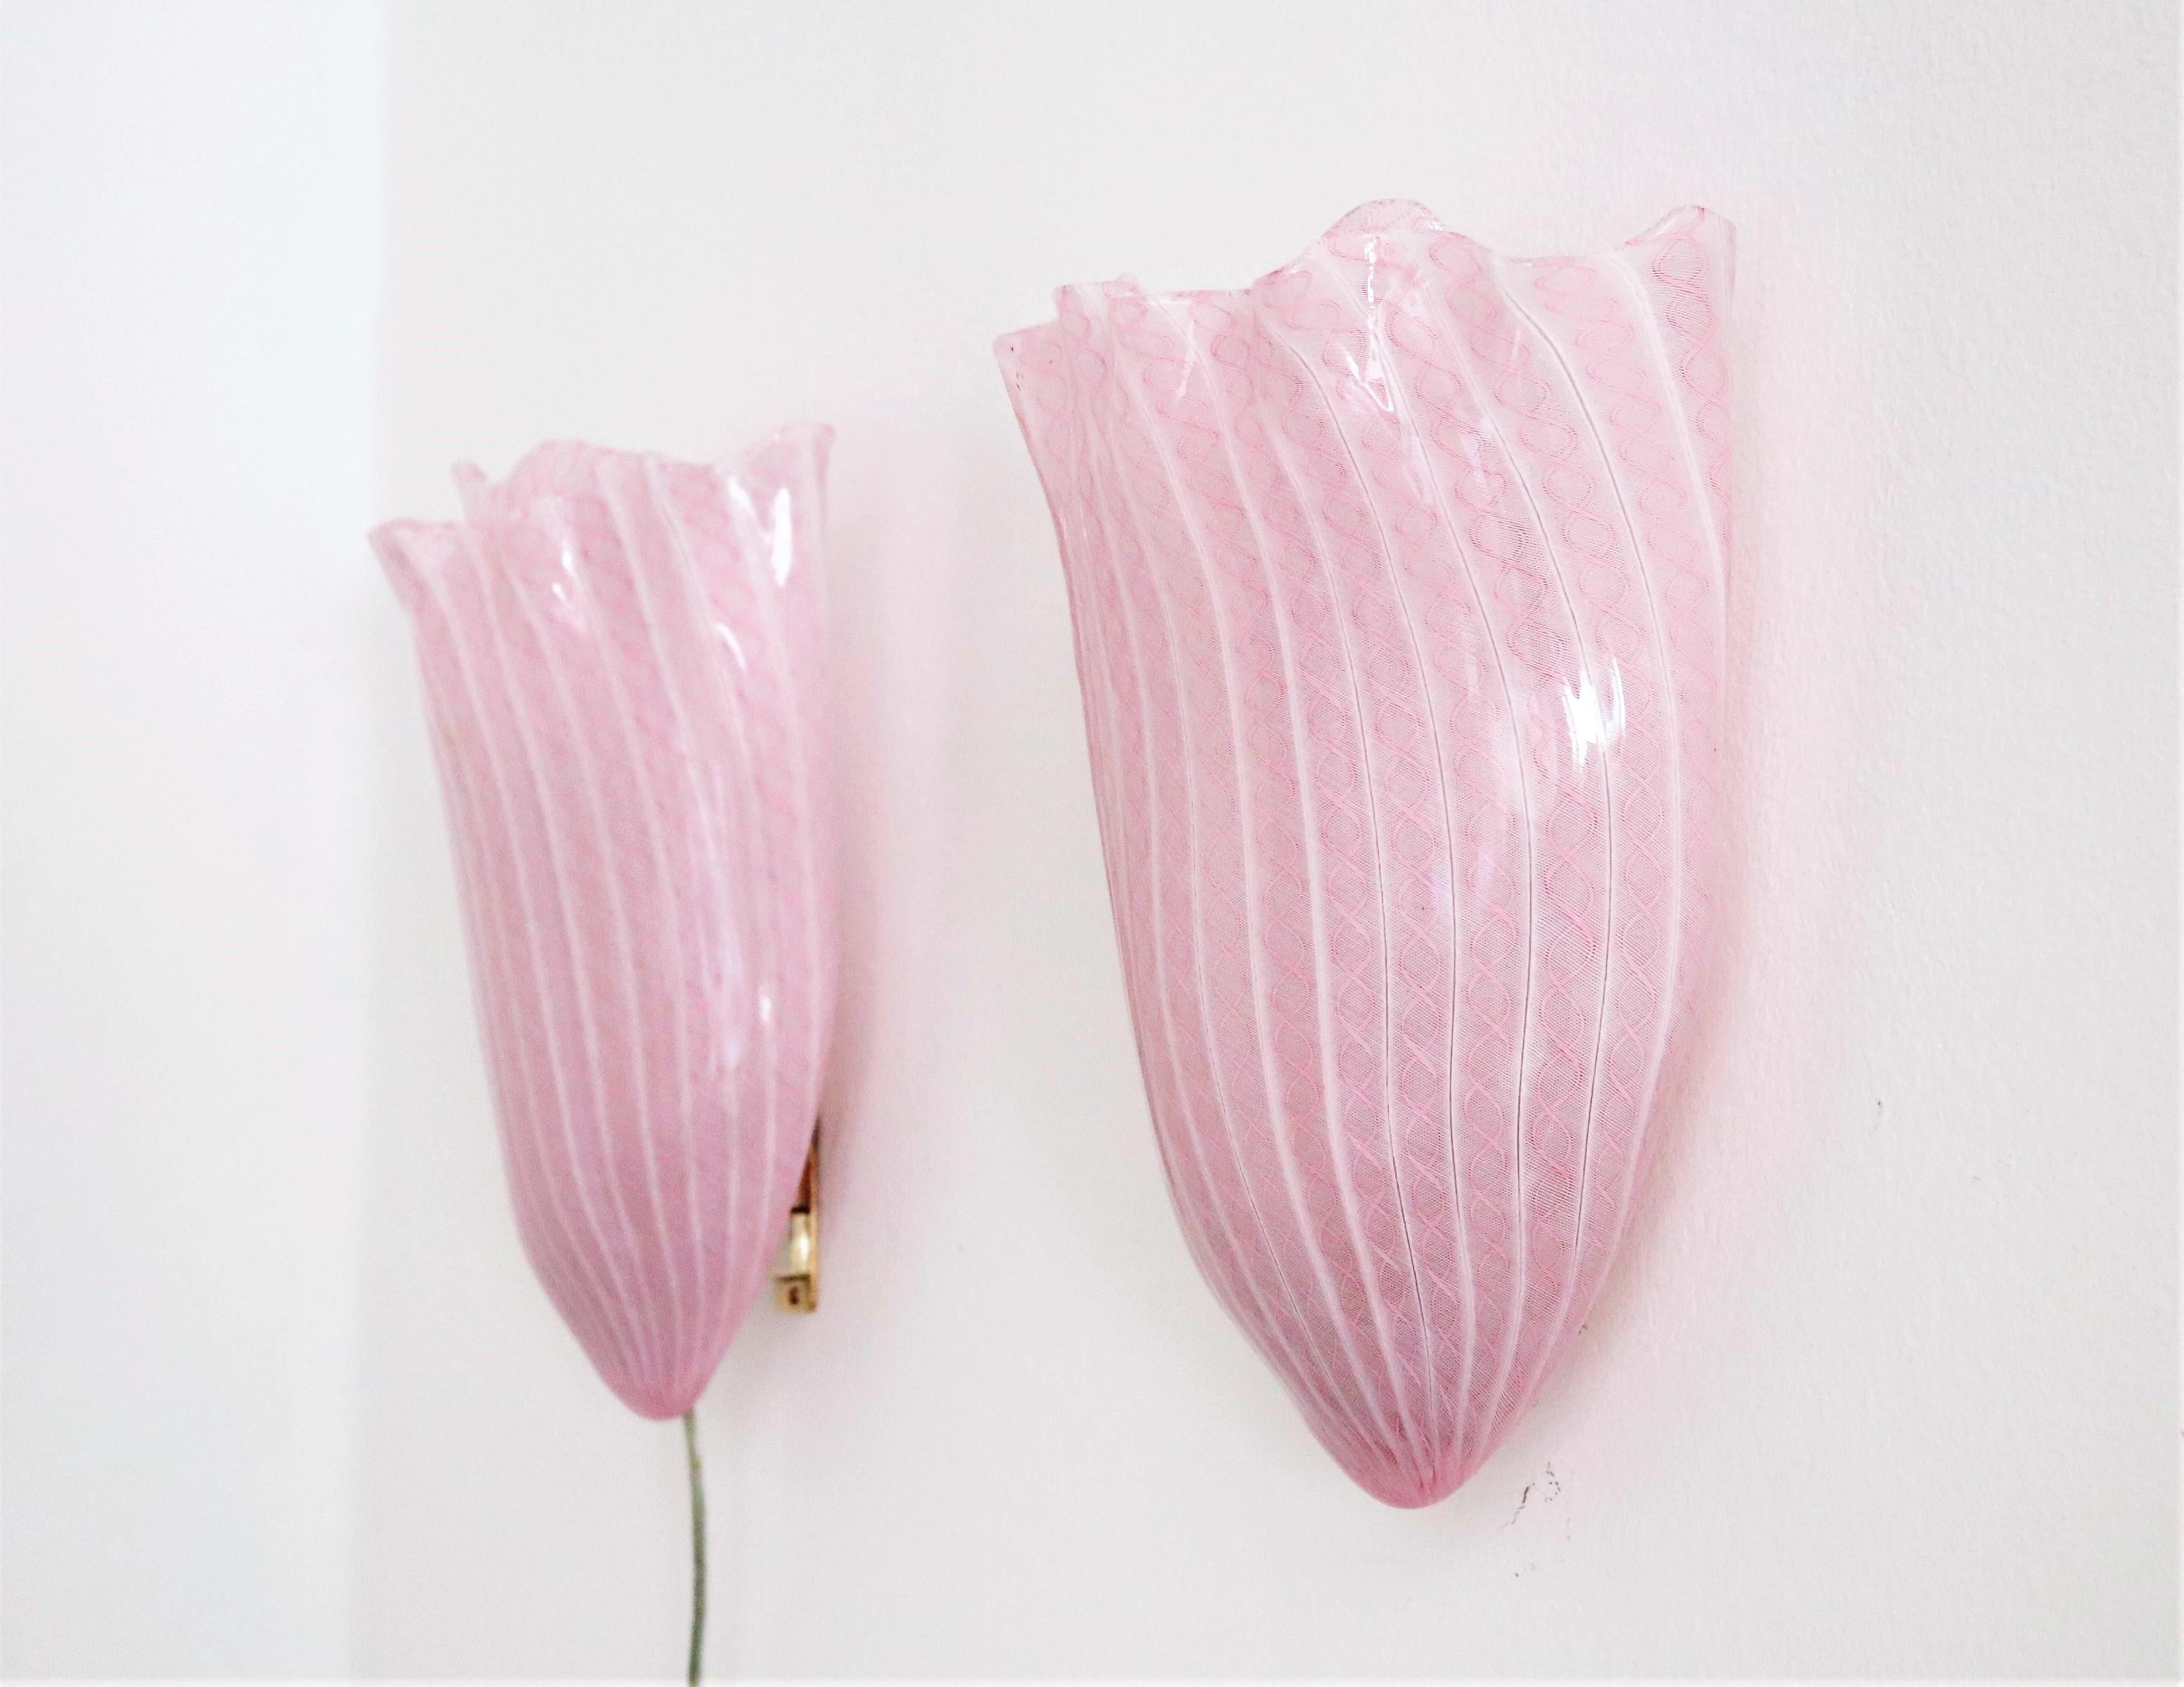 Gorgeous and rare pair of wall sconces handcrafted from Murano Glass Master Fulvio Bianconi for Venini during the 1950s.
Both wall lights are made of pink and white swirled Murano art glass using the 